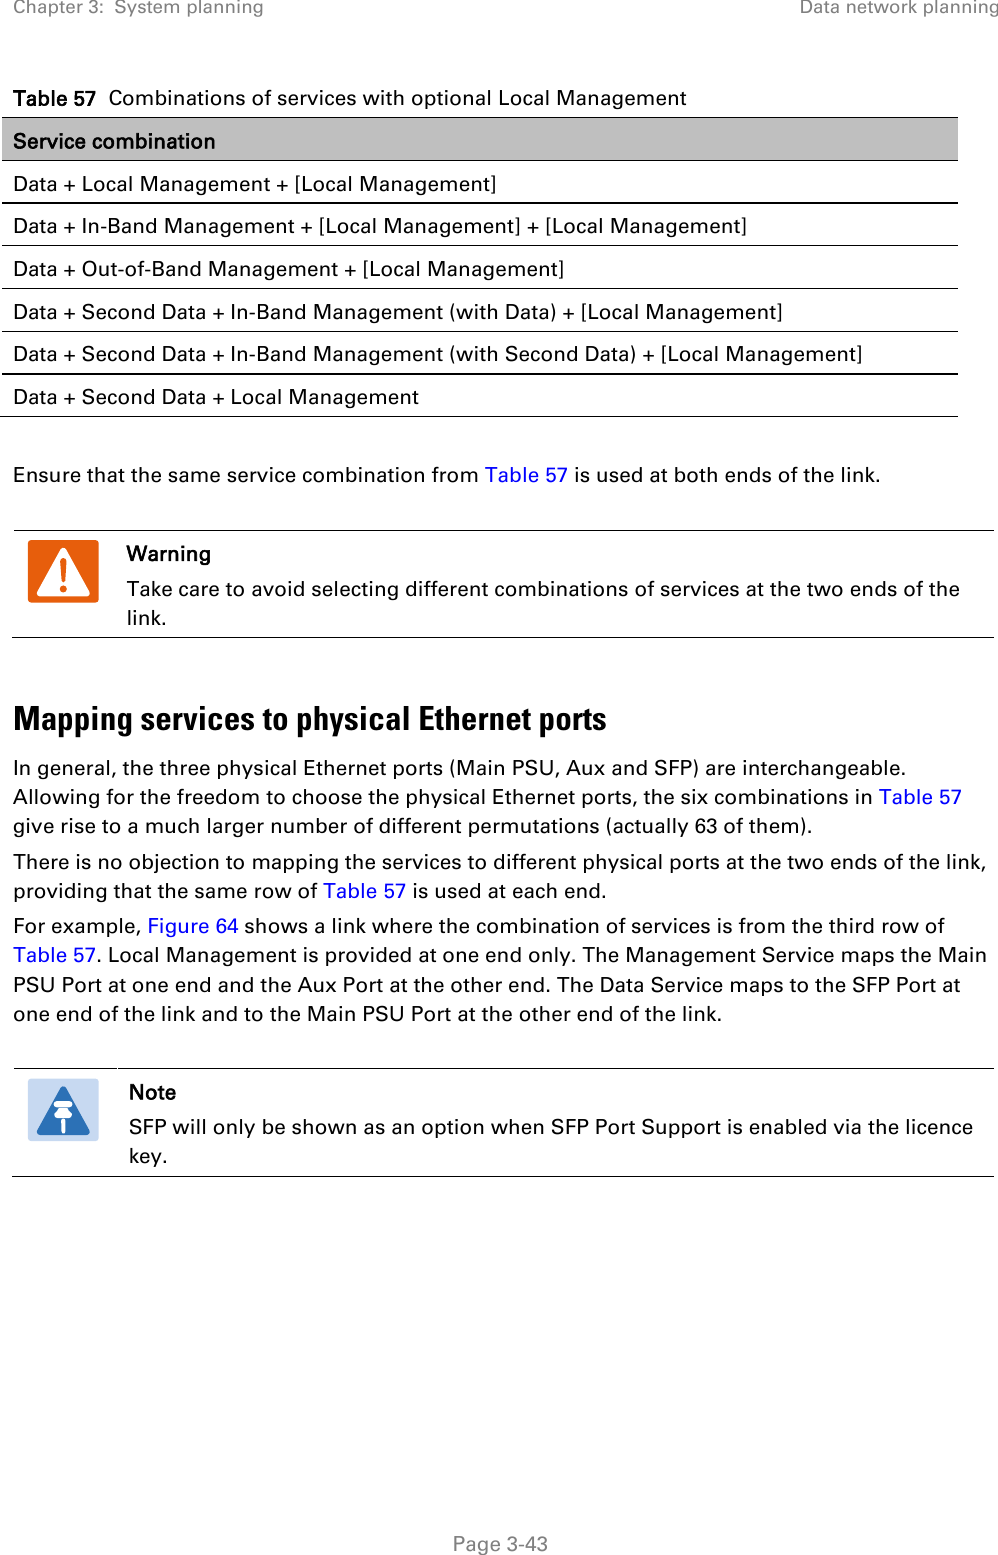 Chapter 3:  System planning Data network planning  Table 57  Combinations of services with optional Local Management Service combination Data + Local Management + [Local Management] Data + In-Band Management + [Local Management] + [Local Management] Data + Out-of-Band Management + [Local Management] Data + Second Data + In-Band Management (with Data) + [Local Management] Data + Second Data + In-Band Management (with Second Data) + [Local Management] Data + Second Data + Local Management  Ensure that the same service combination from Table 57 is used at both ends of the link.   Warning Take care to avoid selecting different combinations of services at the two ends of the link.  Mapping services to physical Ethernet ports In general, the three physical Ethernet ports (Main PSU, Aux and SFP) are interchangeable. Allowing for the freedom to choose the physical Ethernet ports, the six combinations in Table 57 give rise to a much larger number of different permutations (actually 63 of them). There is no objection to mapping the services to different physical ports at the two ends of the link, providing that the same row of Table 57 is used at each end. For example, Figure 64 shows a link where the combination of services is from the third row of Table 57. Local Management is provided at one end only. The Management Service maps the Main PSU Port at one end and the Aux Port at the other end. The Data Service maps to the SFP Port at one end of the link and to the Main PSU Port at the other end of the link.   Note SFP will only be shown as an option when SFP Port Support is enabled via the licence key.   Page 3-43 